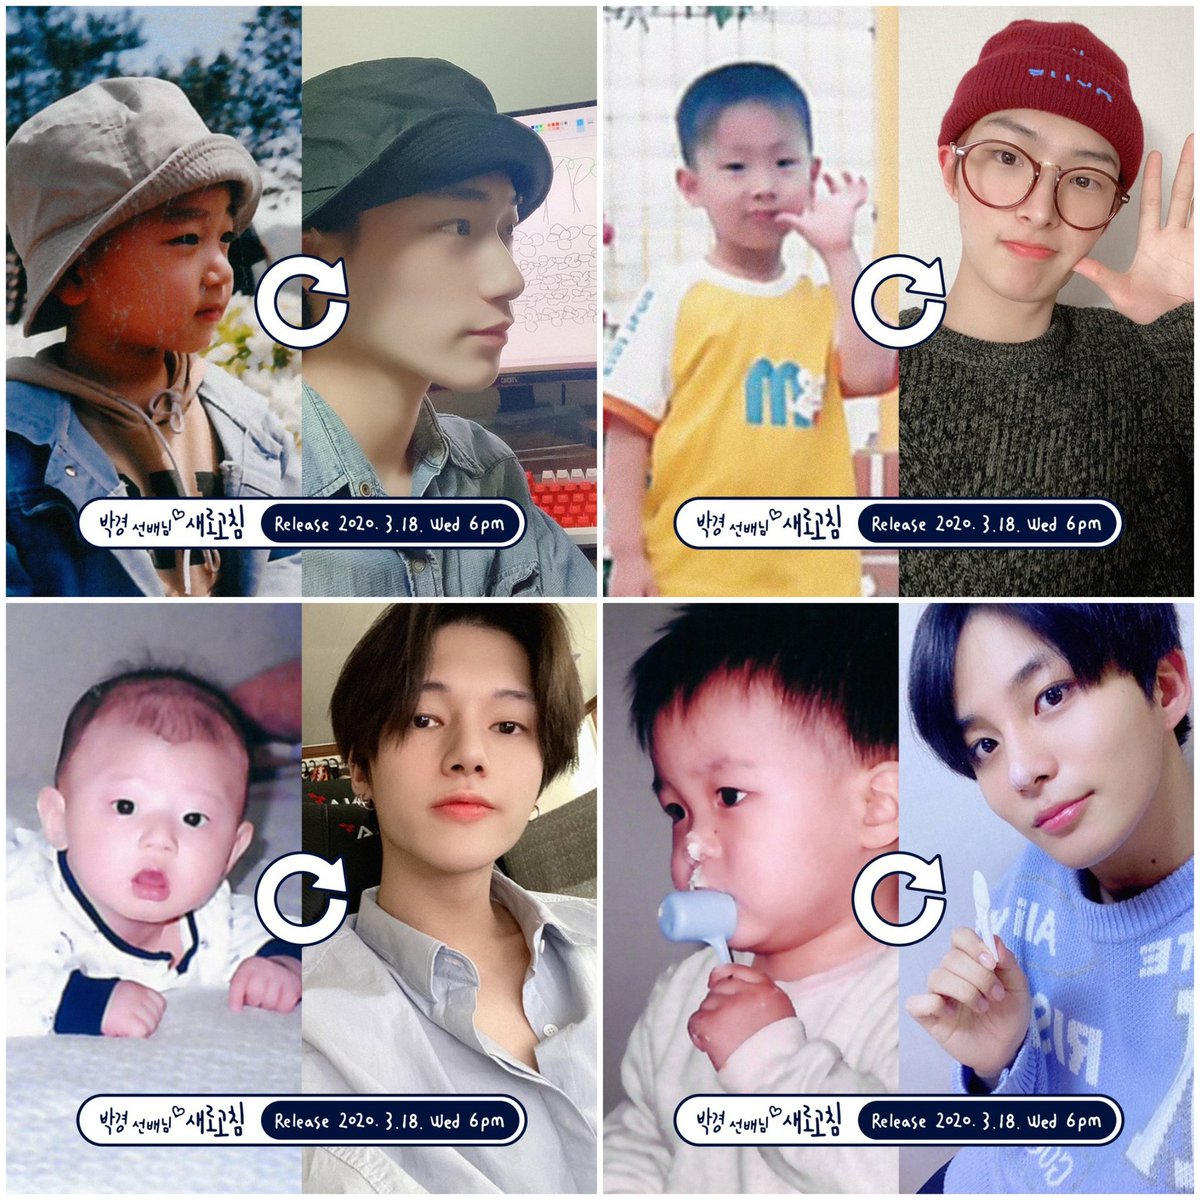 All of the Ateez members joined Park Kyung's Refesh challenge on instagram  #세로고짐  @blockb_official  @ATEEZofficial